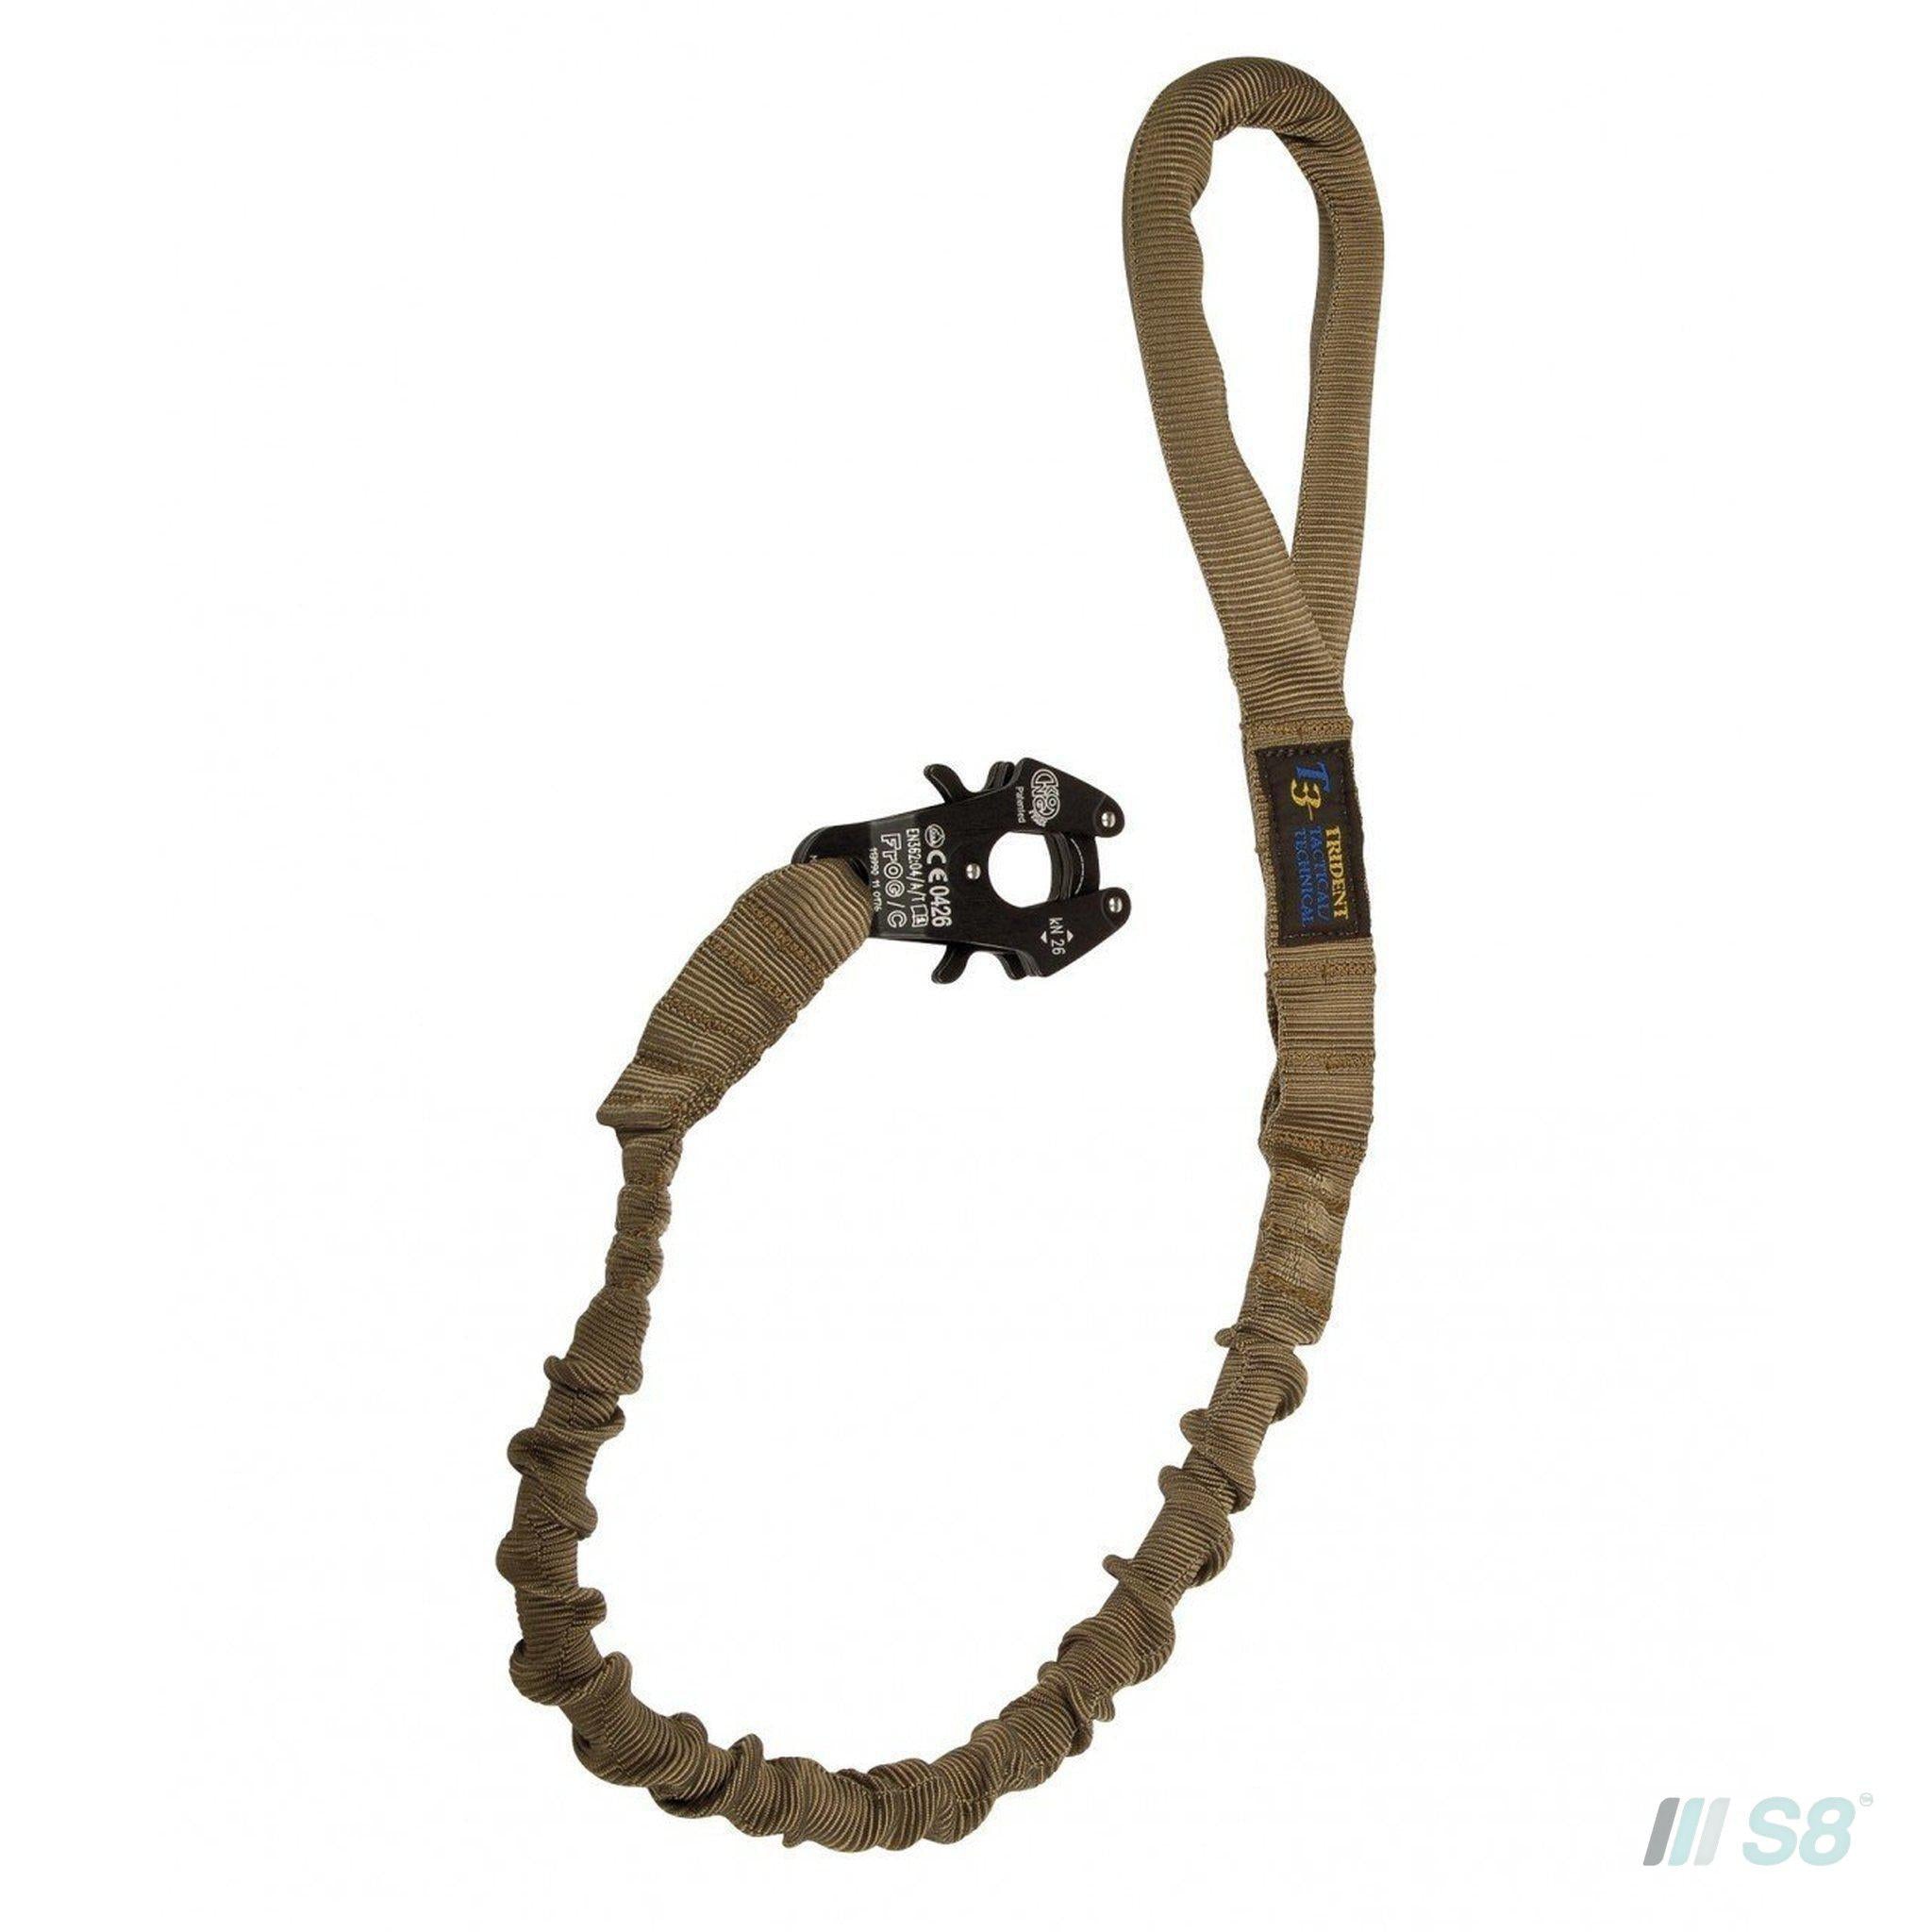 T3 K-9 Patrol Lead-T3-S8 Products Group